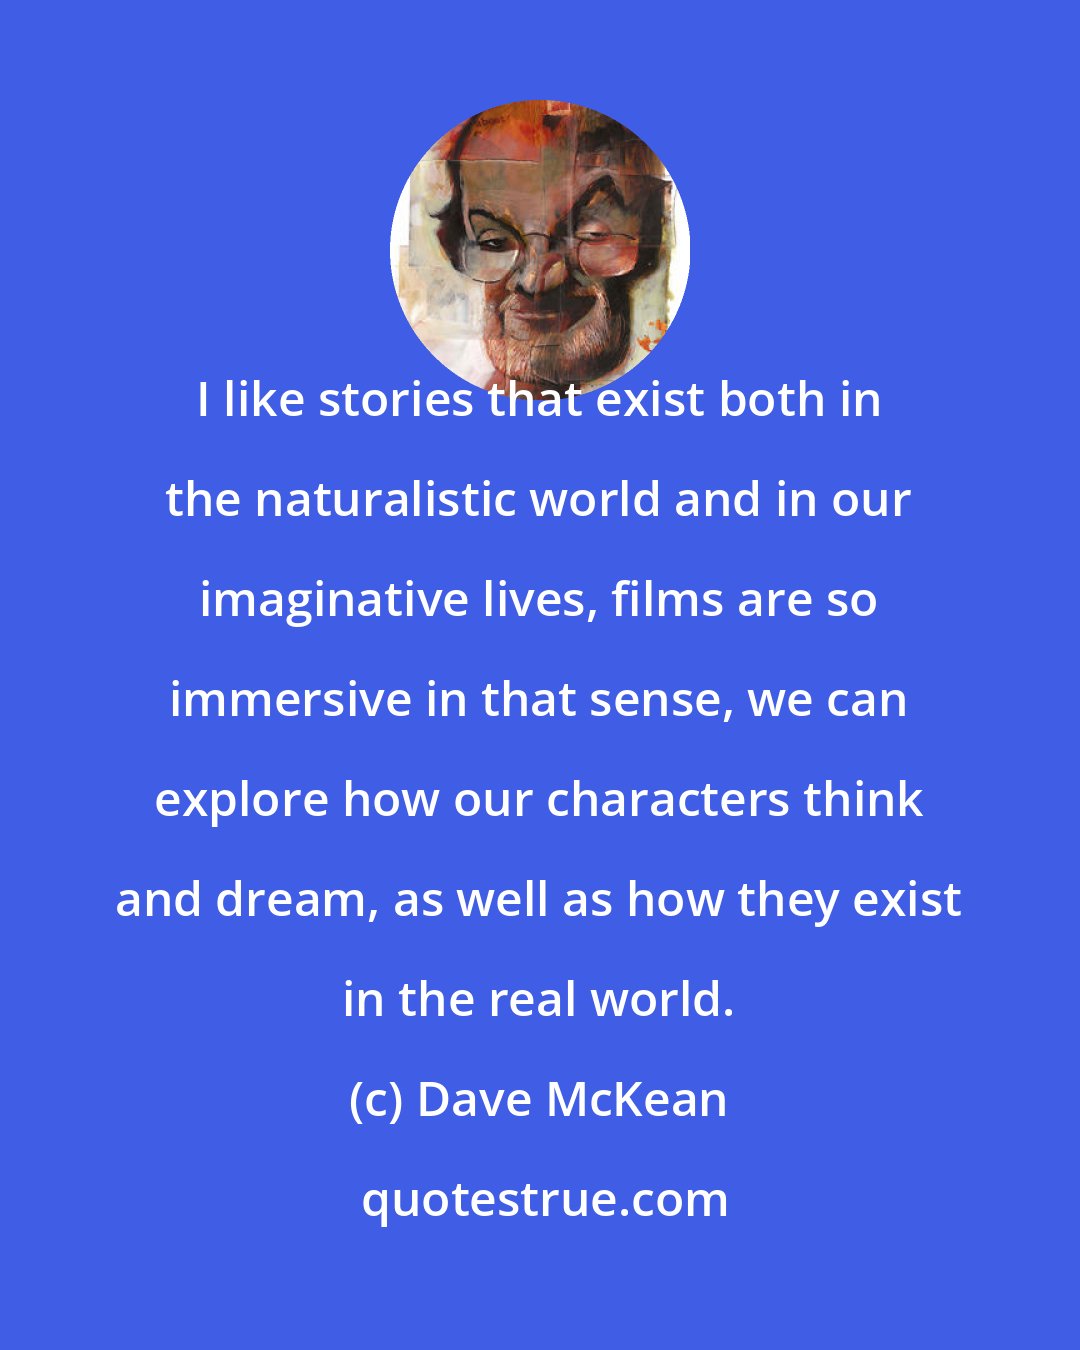 Dave McKean: I like stories that exist both in the naturalistic world and in our imaginative lives, films are so immersive in that sense, we can explore how our characters think and dream, as well as how they exist in the real world.